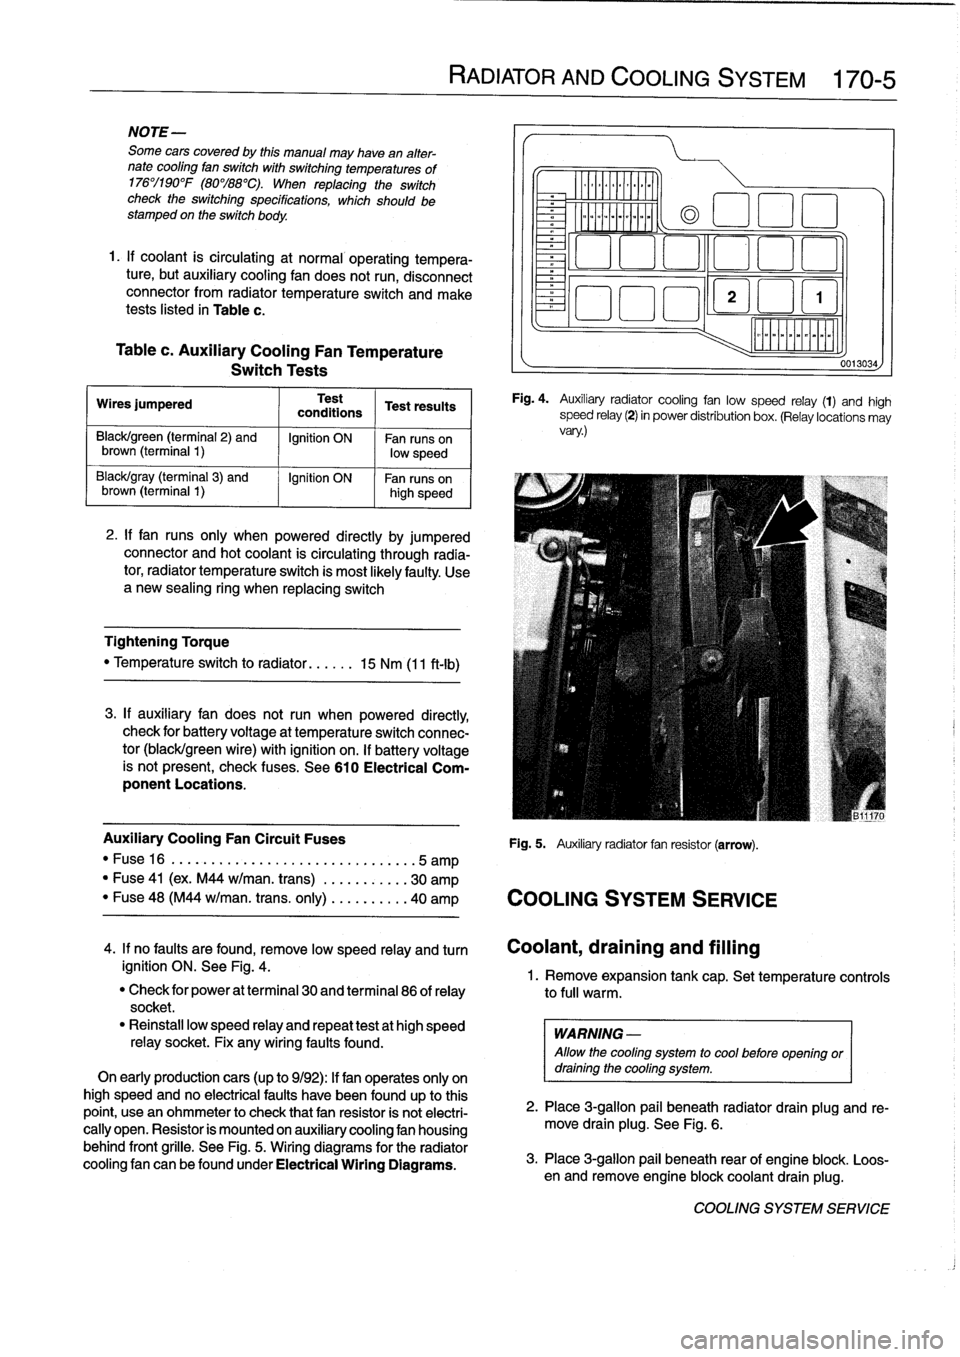 BMW 328i 1995 E36 Workshop Manual 
NOTE-

Some
cars
covered
by
this
manual
may
have
an
alter-
nate
cooling
fan
switchwith
switching
temperatures
of
176%190W
(80%88°C)
.
When
replacing
the
switch
check
theswitching
specifications,
whi